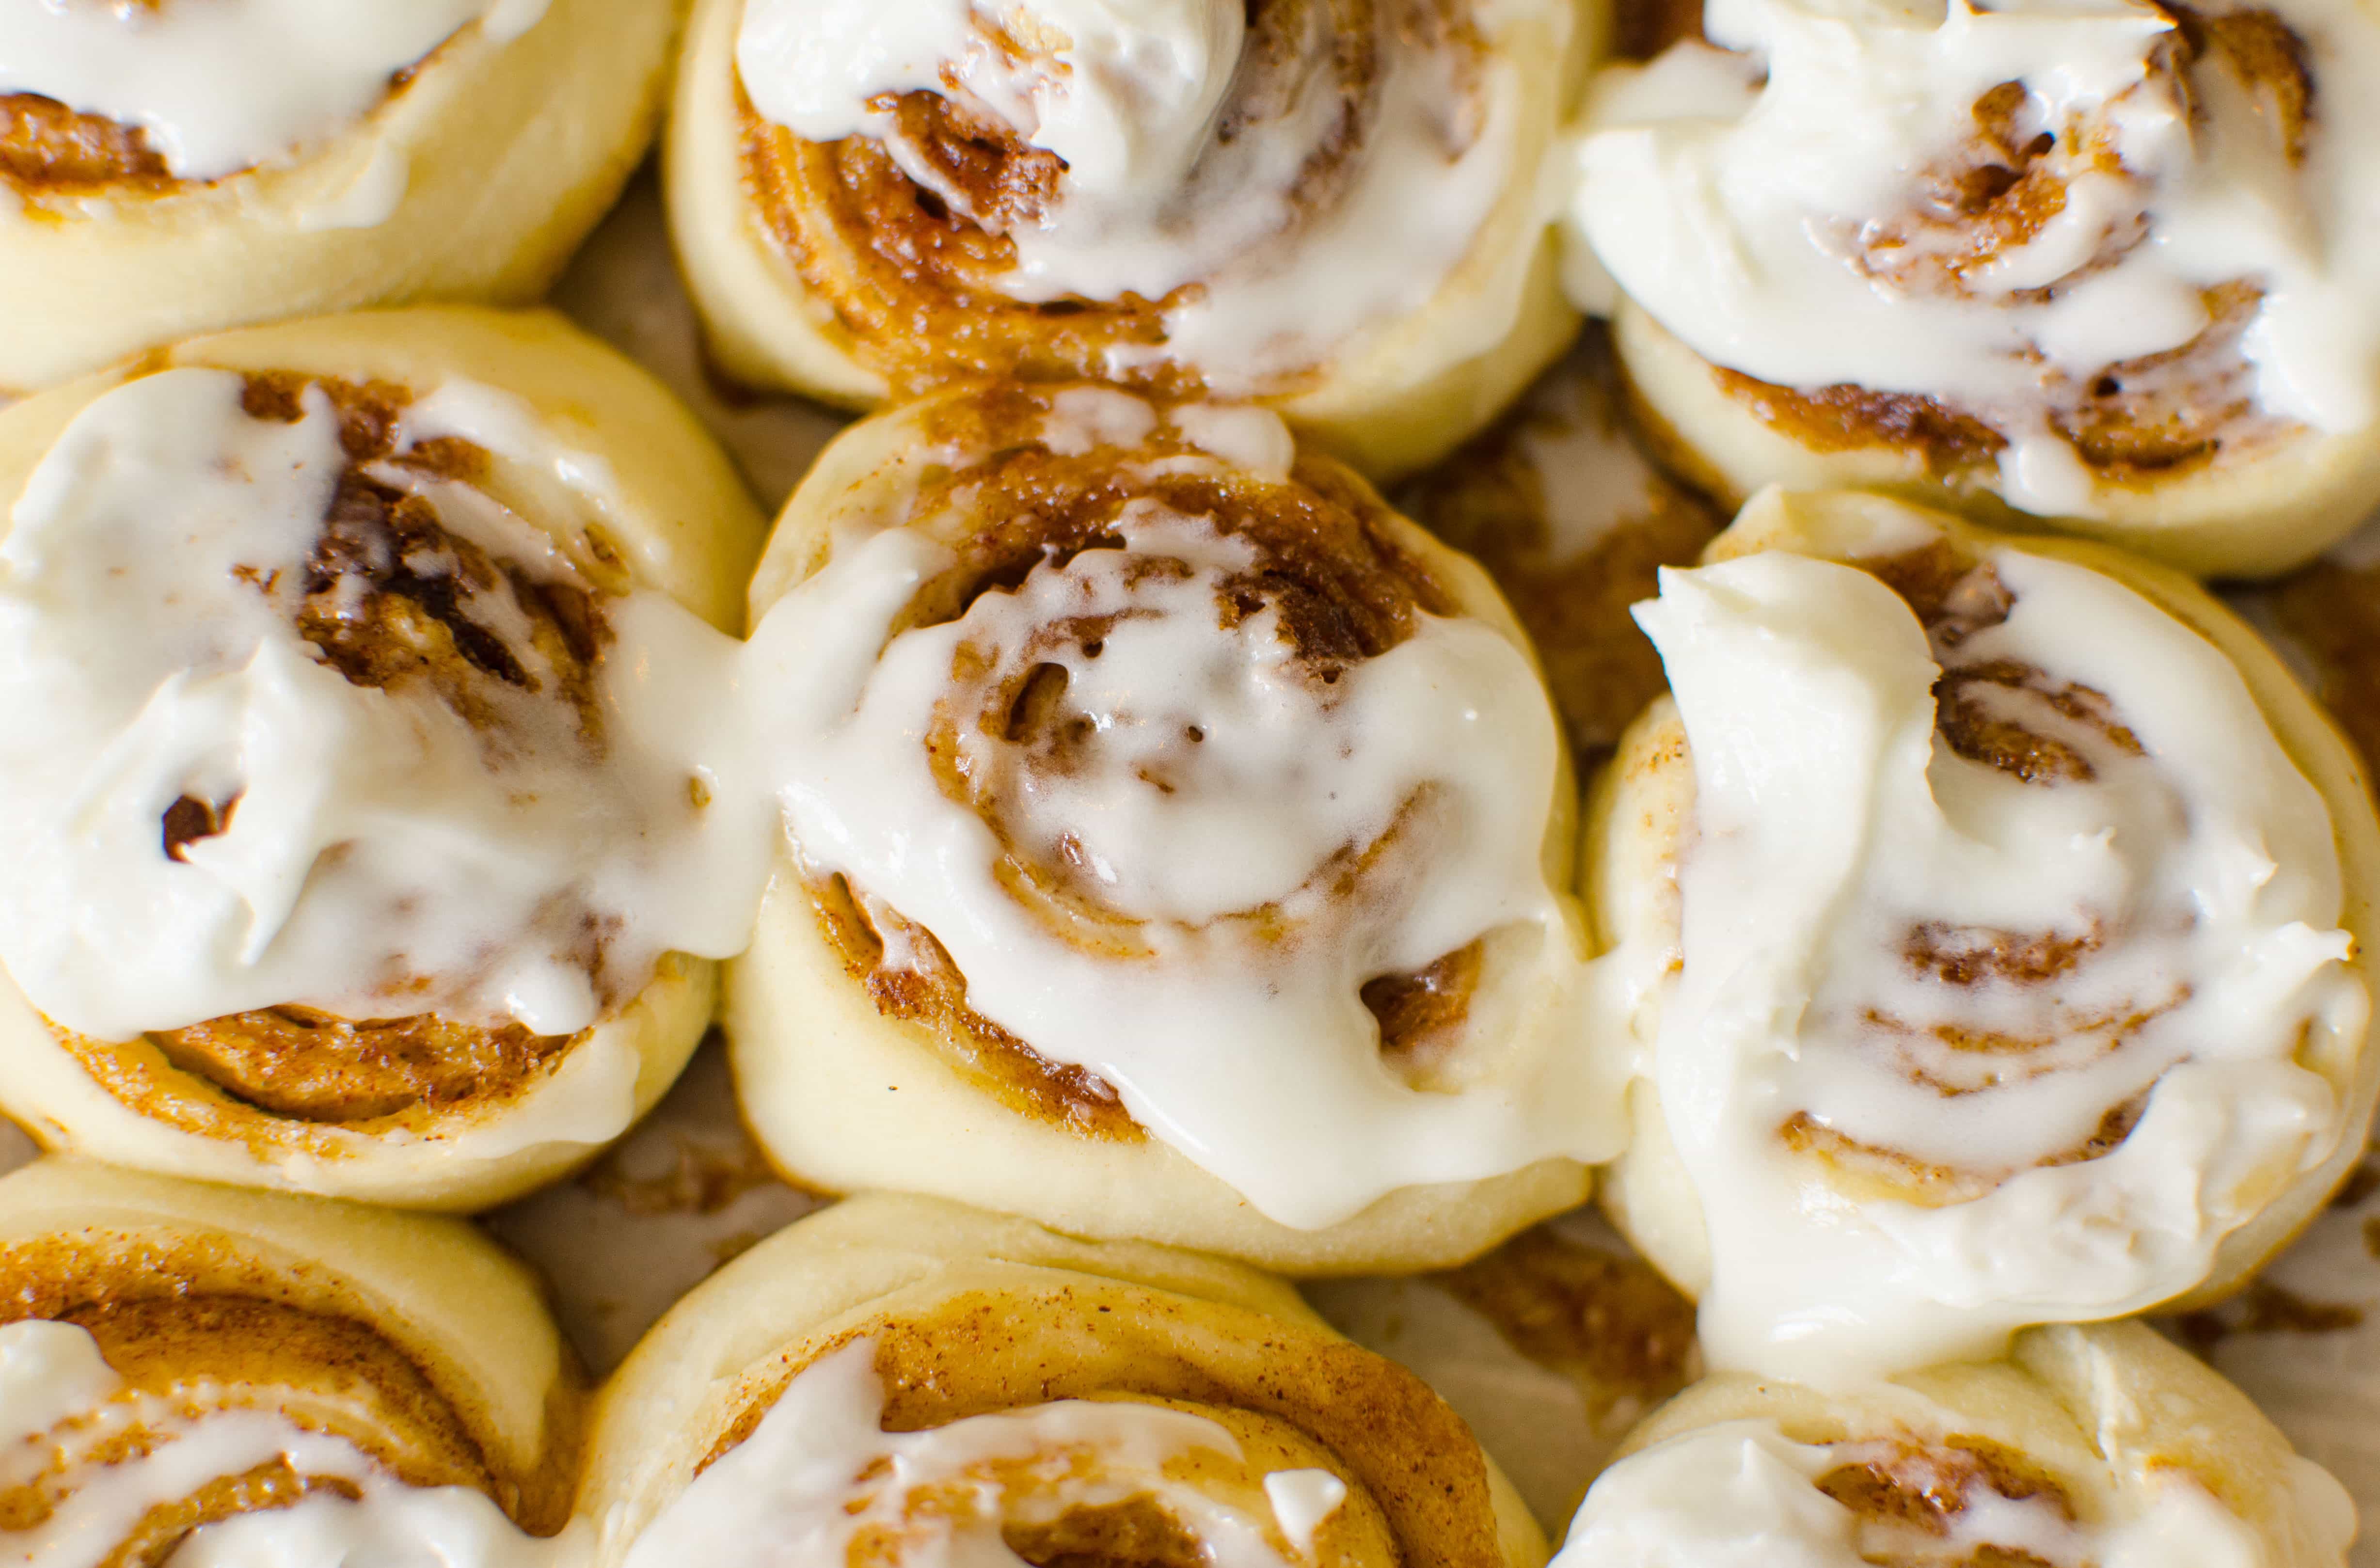 Quick and Easy Cinnamon Rolls are soft and chewy with the perfect ratio of bread to cinnamon filling, topped with a delicious vanilla butter cream. These are fresh, out of your oven in less than 90 minutes!